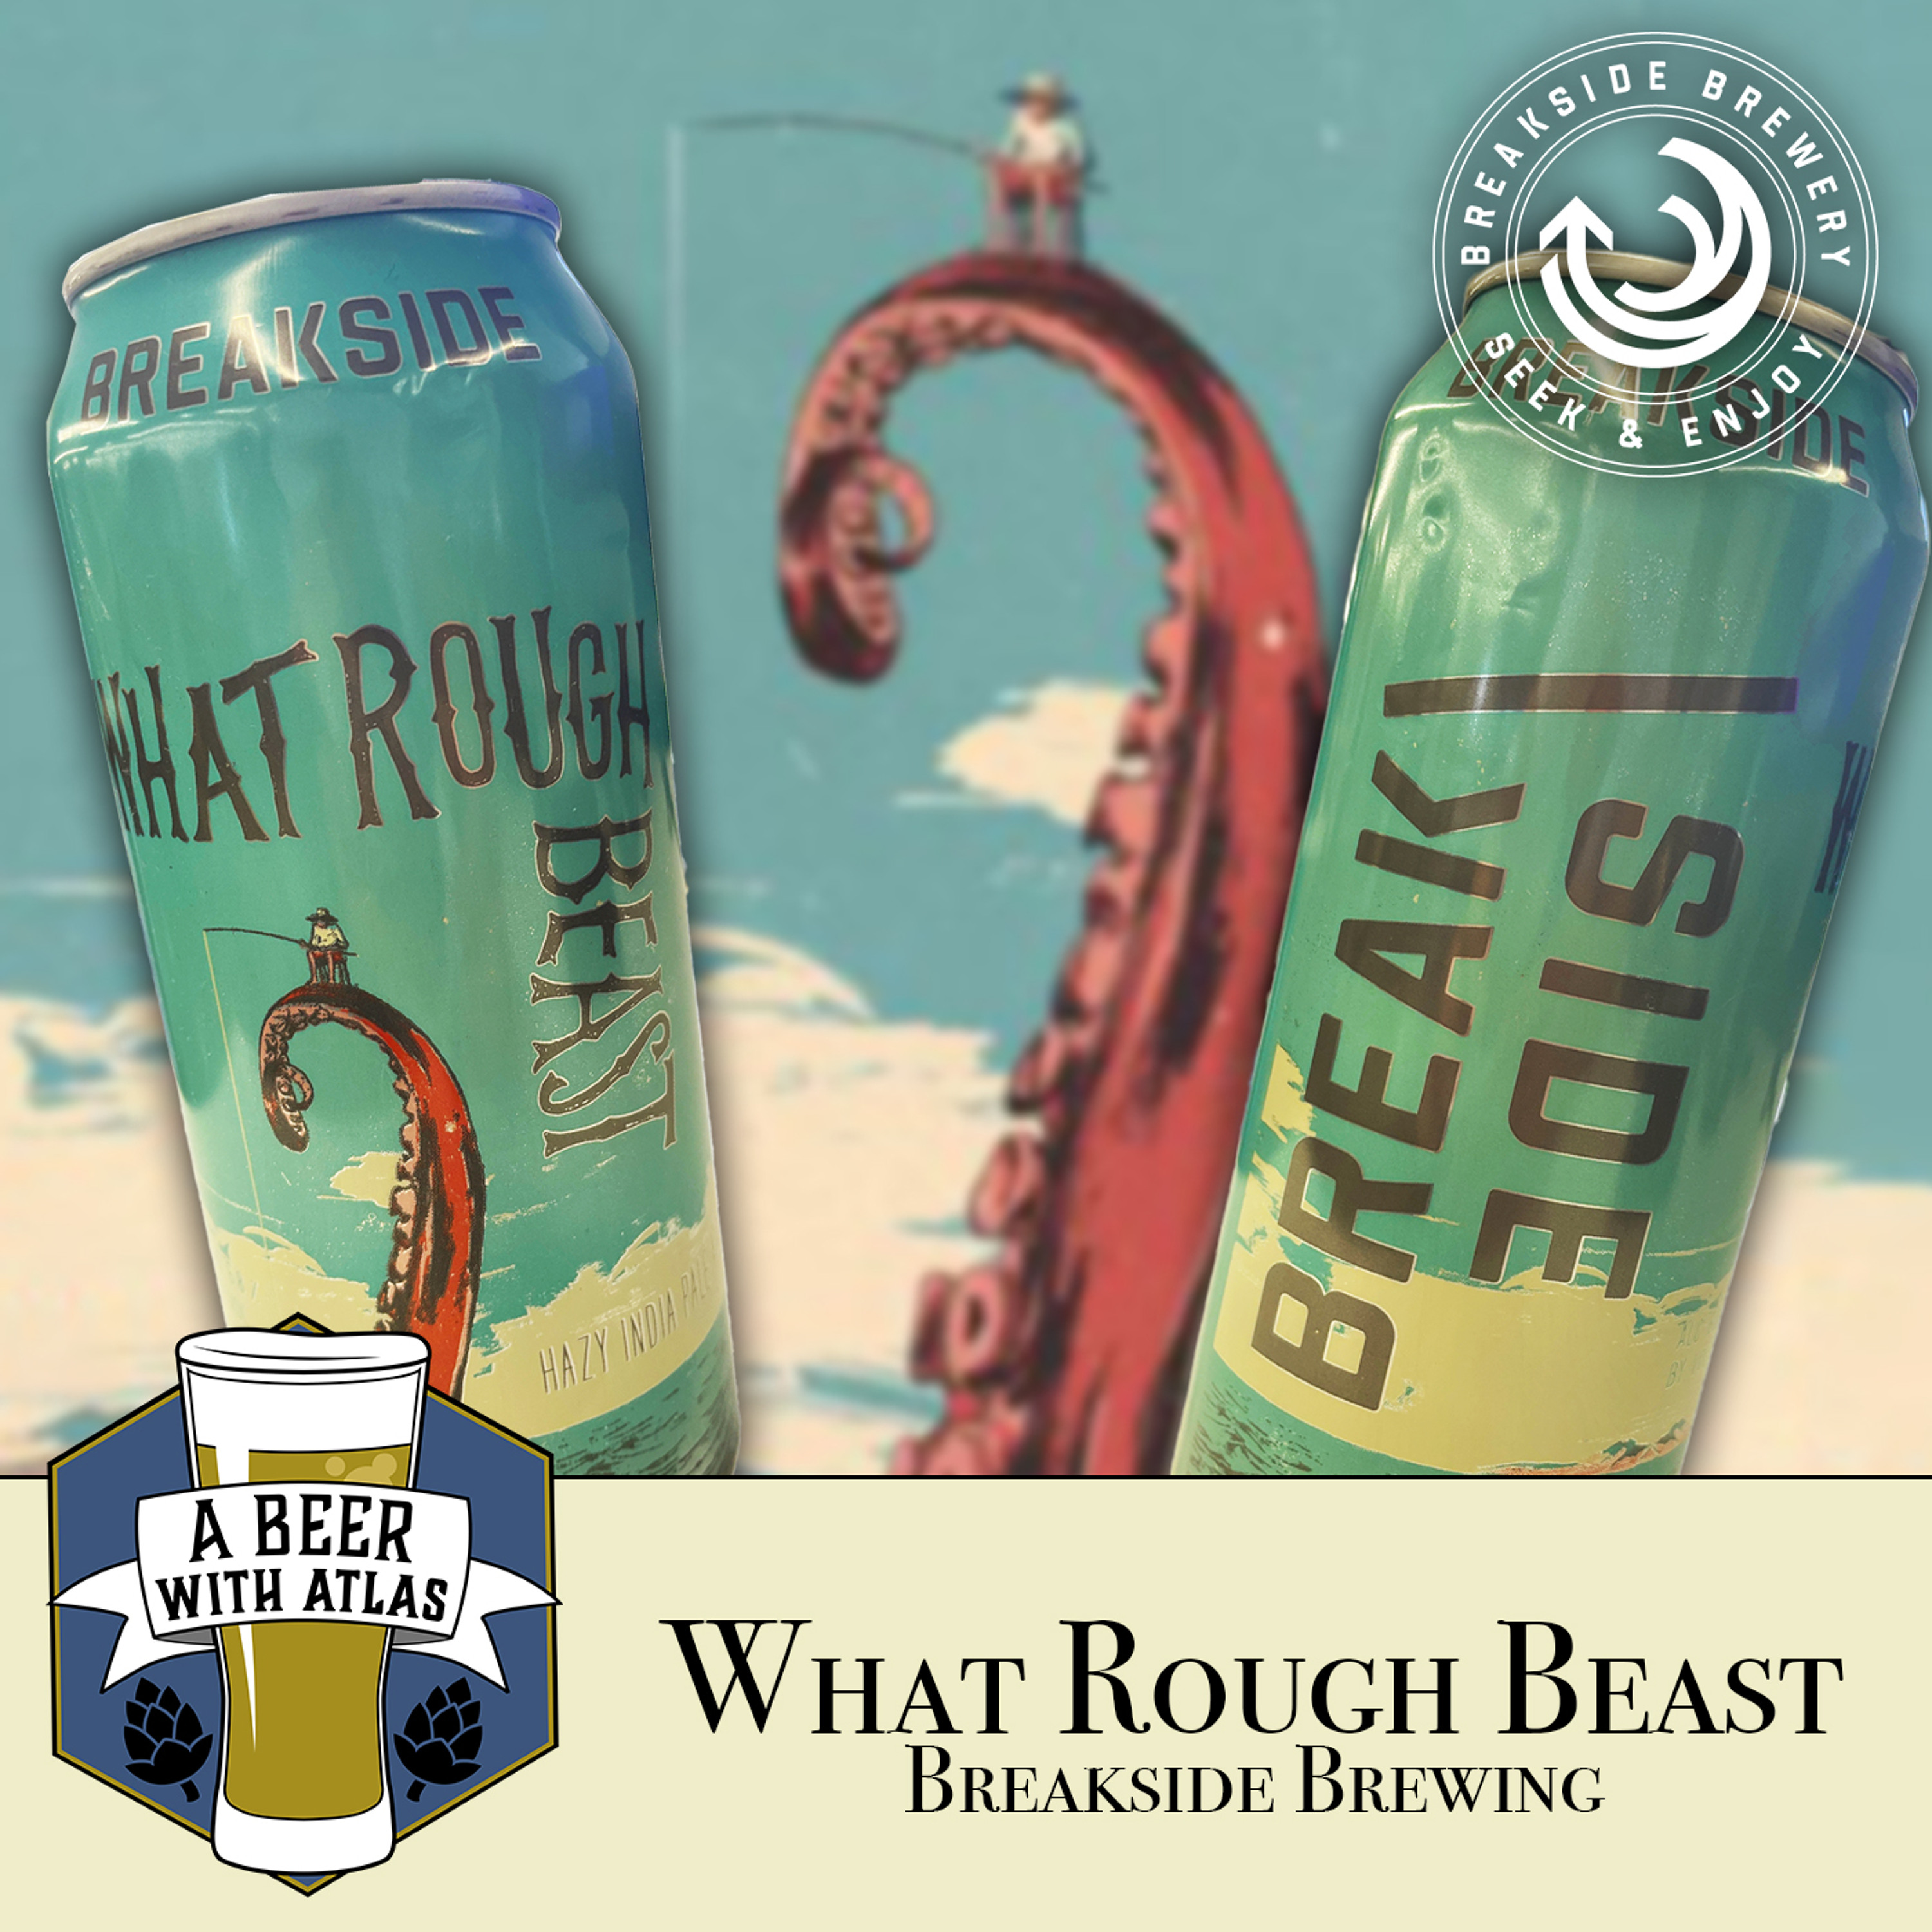 What Rough Beast | A Hazy IPA by Breakside Brewery - A Beer with Atlas 206